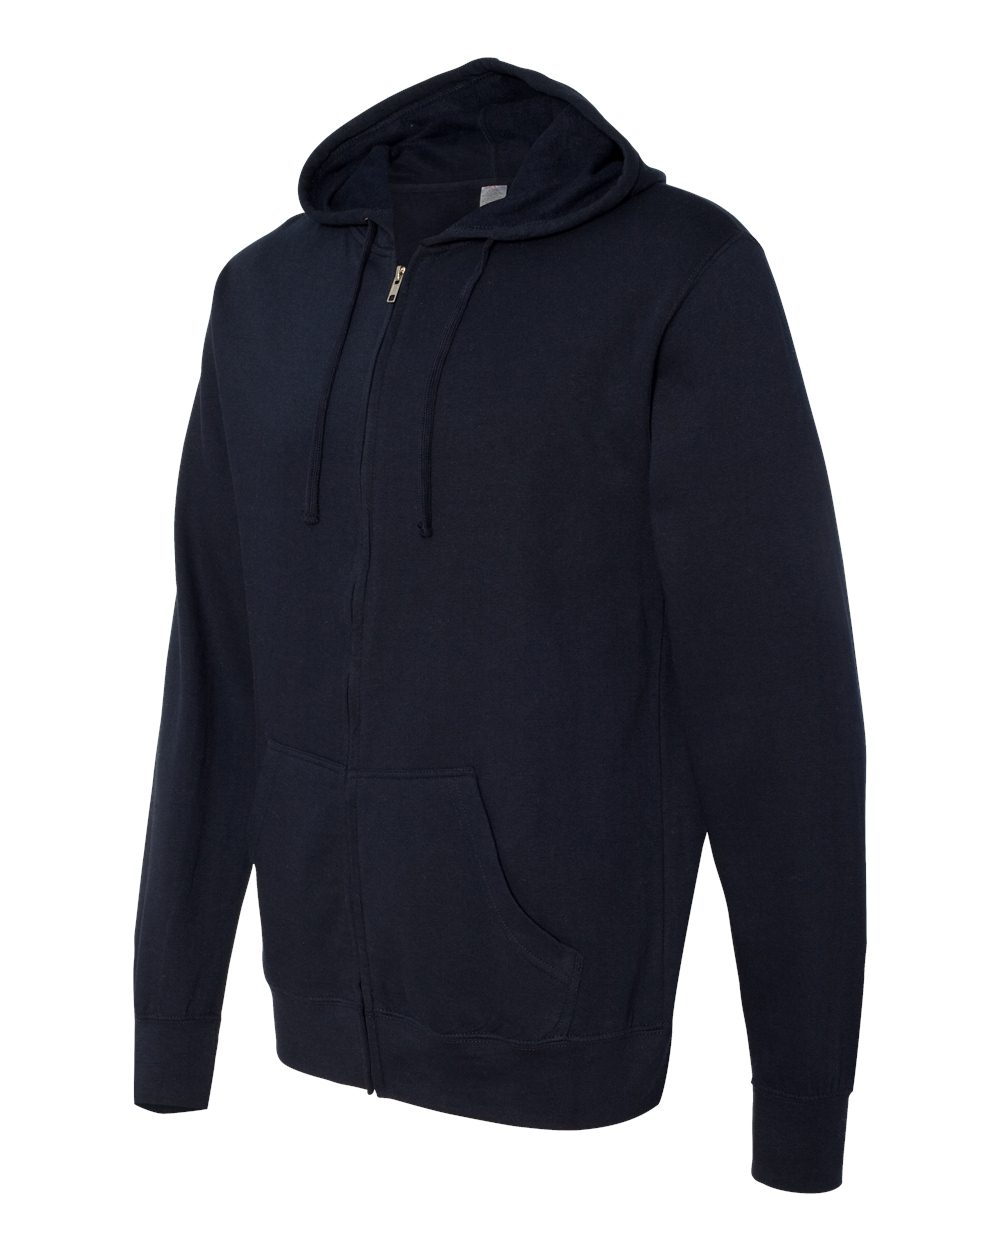 Independent Trading Co. Heavenly Fleece Full-Zip Hooded Pullover - SS2200Z